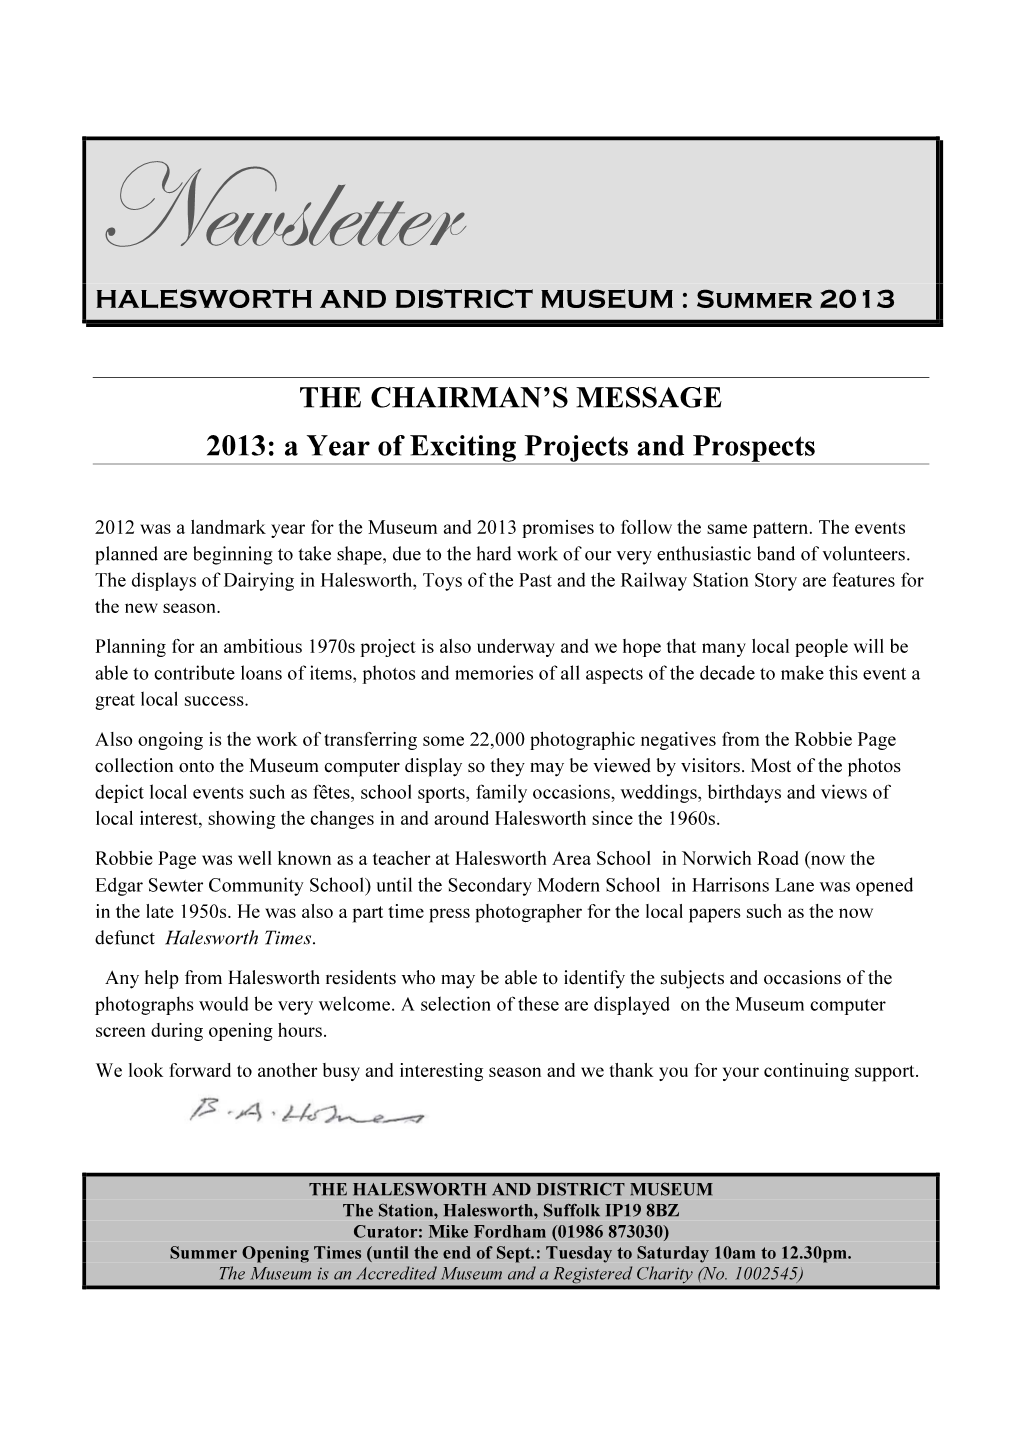 THE CHAIRMAN's MESSAGE 2013: a Year Of